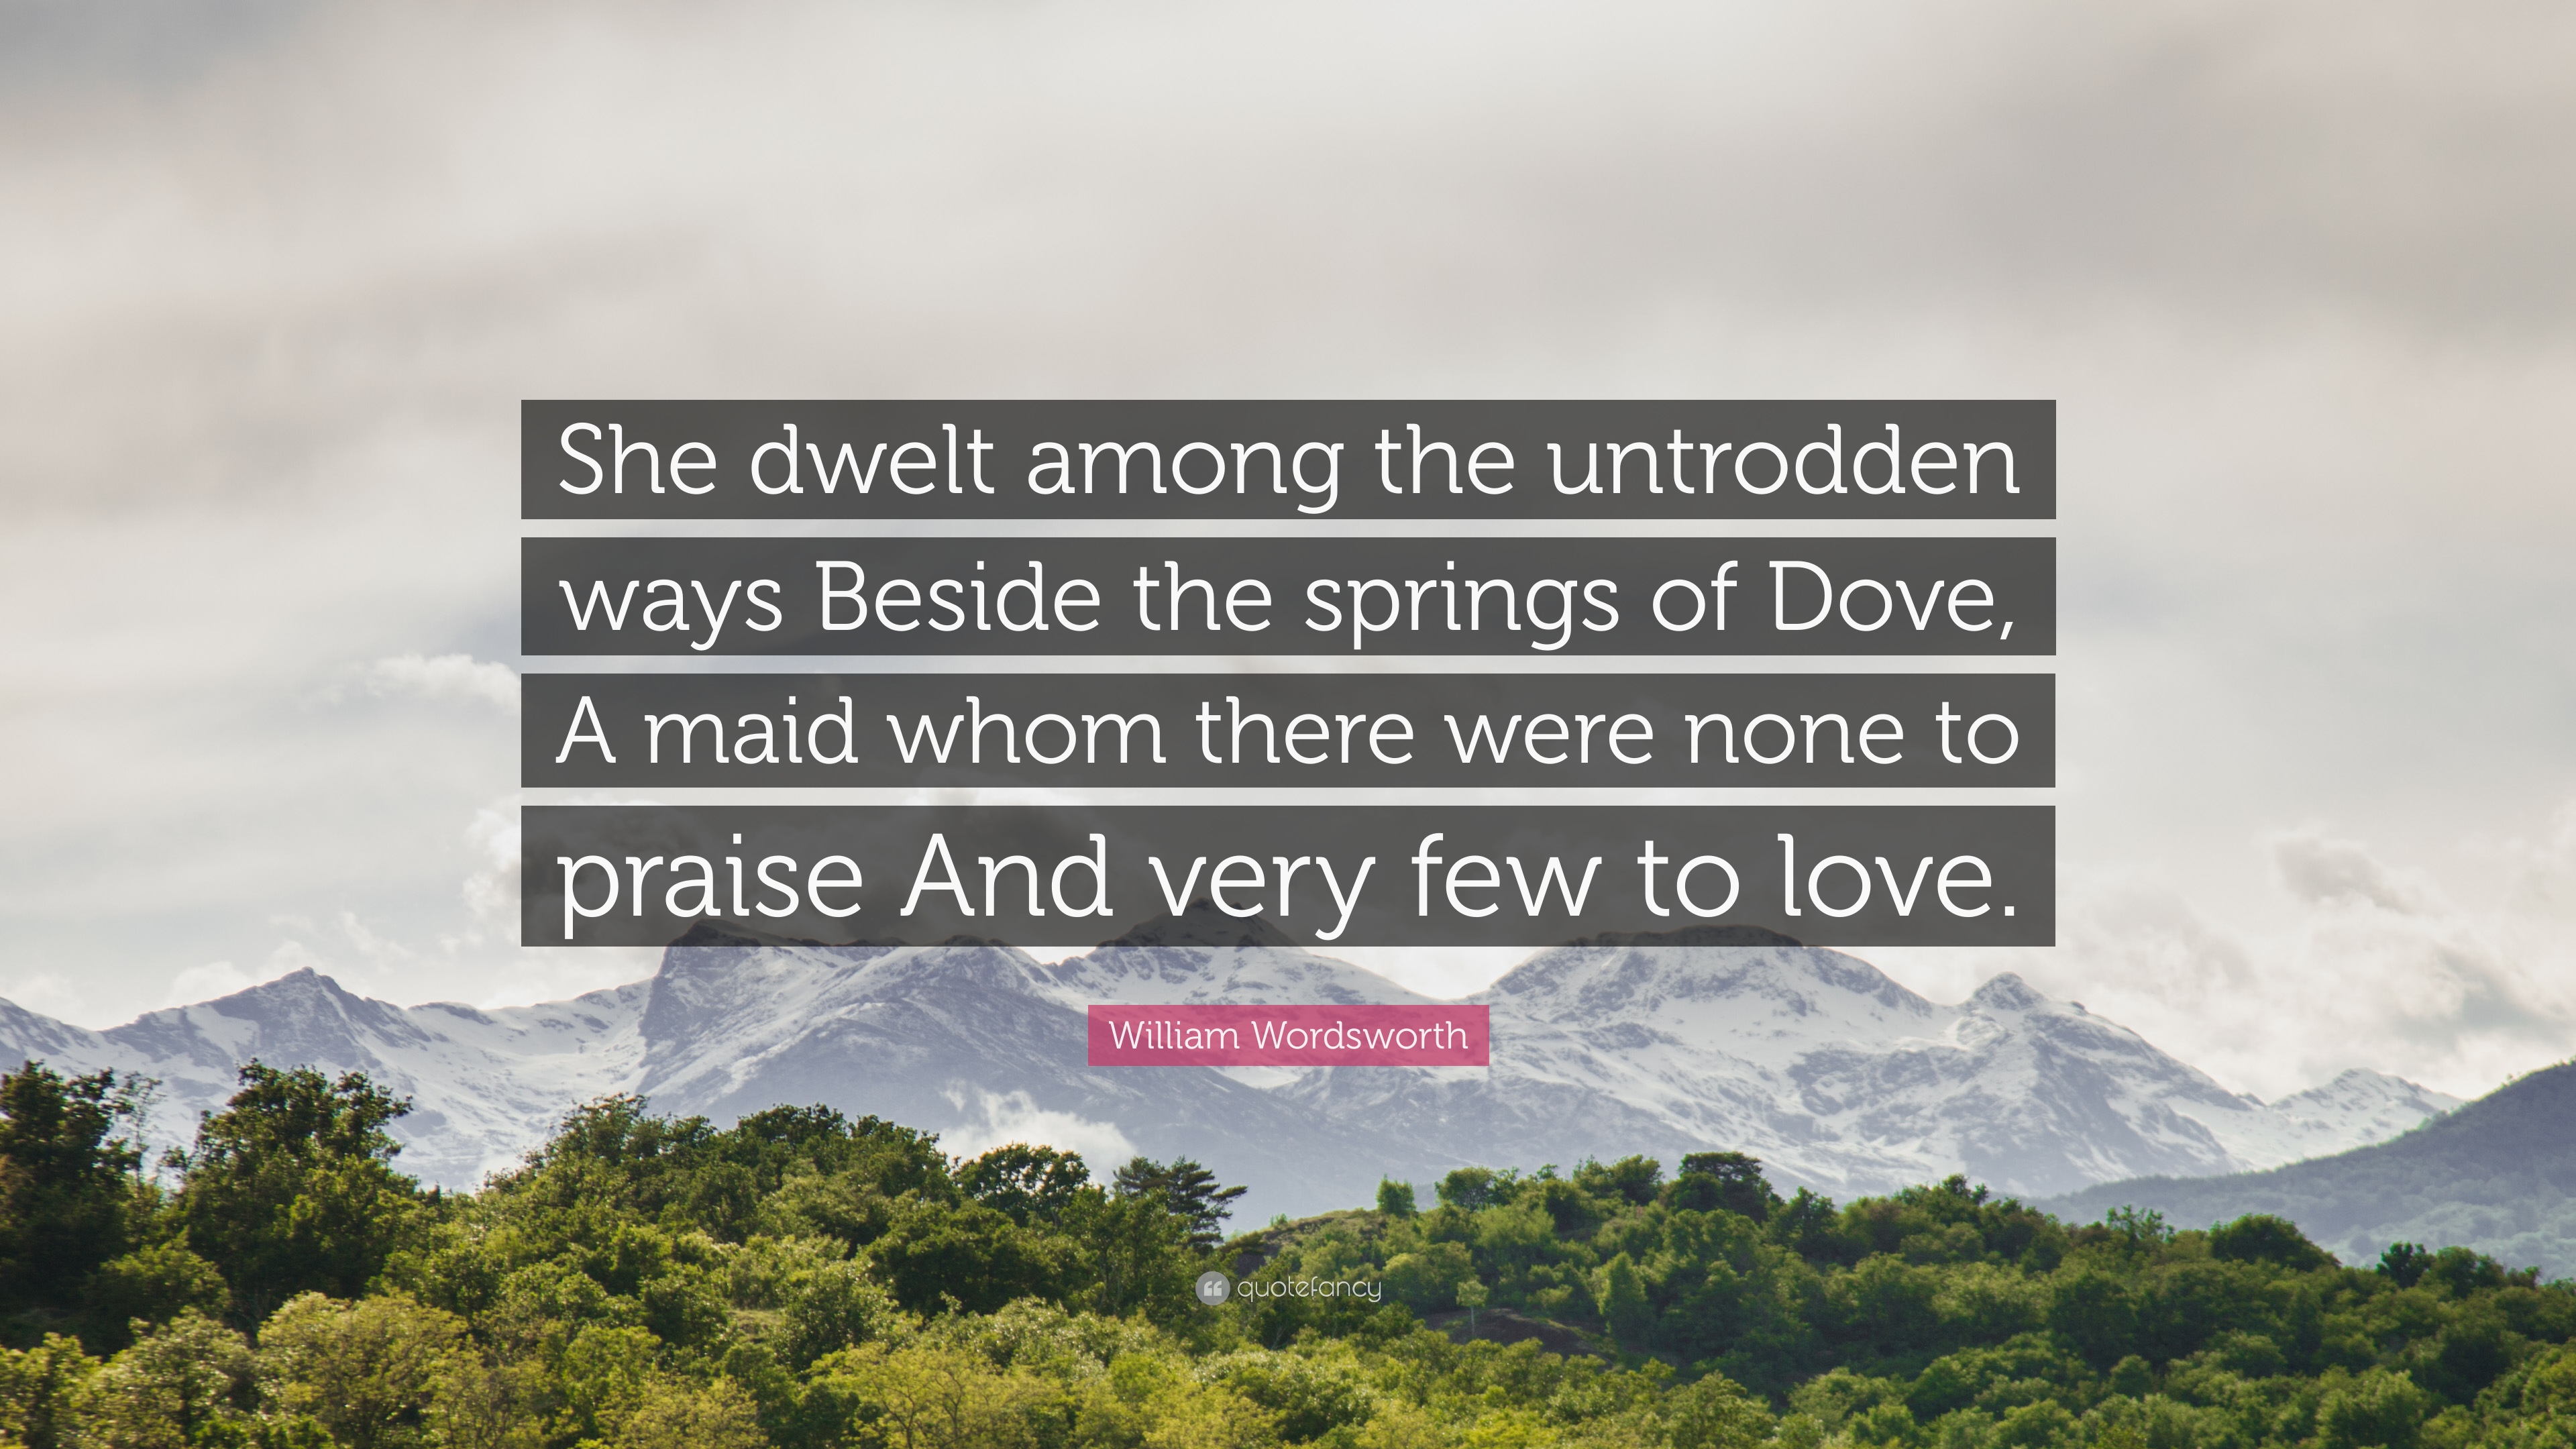 William Wordsworth Quote: “She dwelt among the untrodden